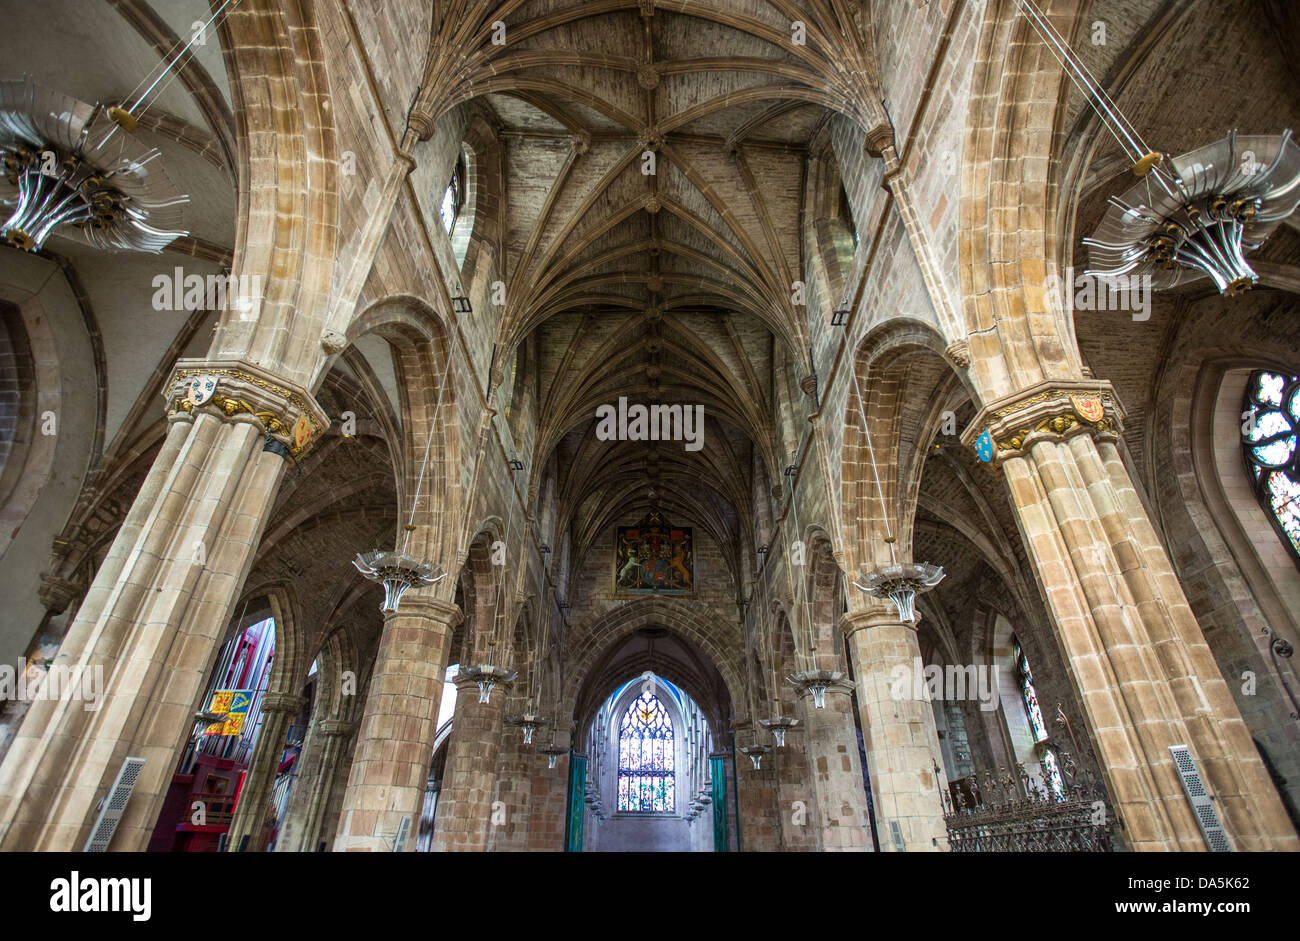 Europe Great Britain, Scotland, Edinburgh, the gothic interior of the St. Giles cathedral Stock Photo